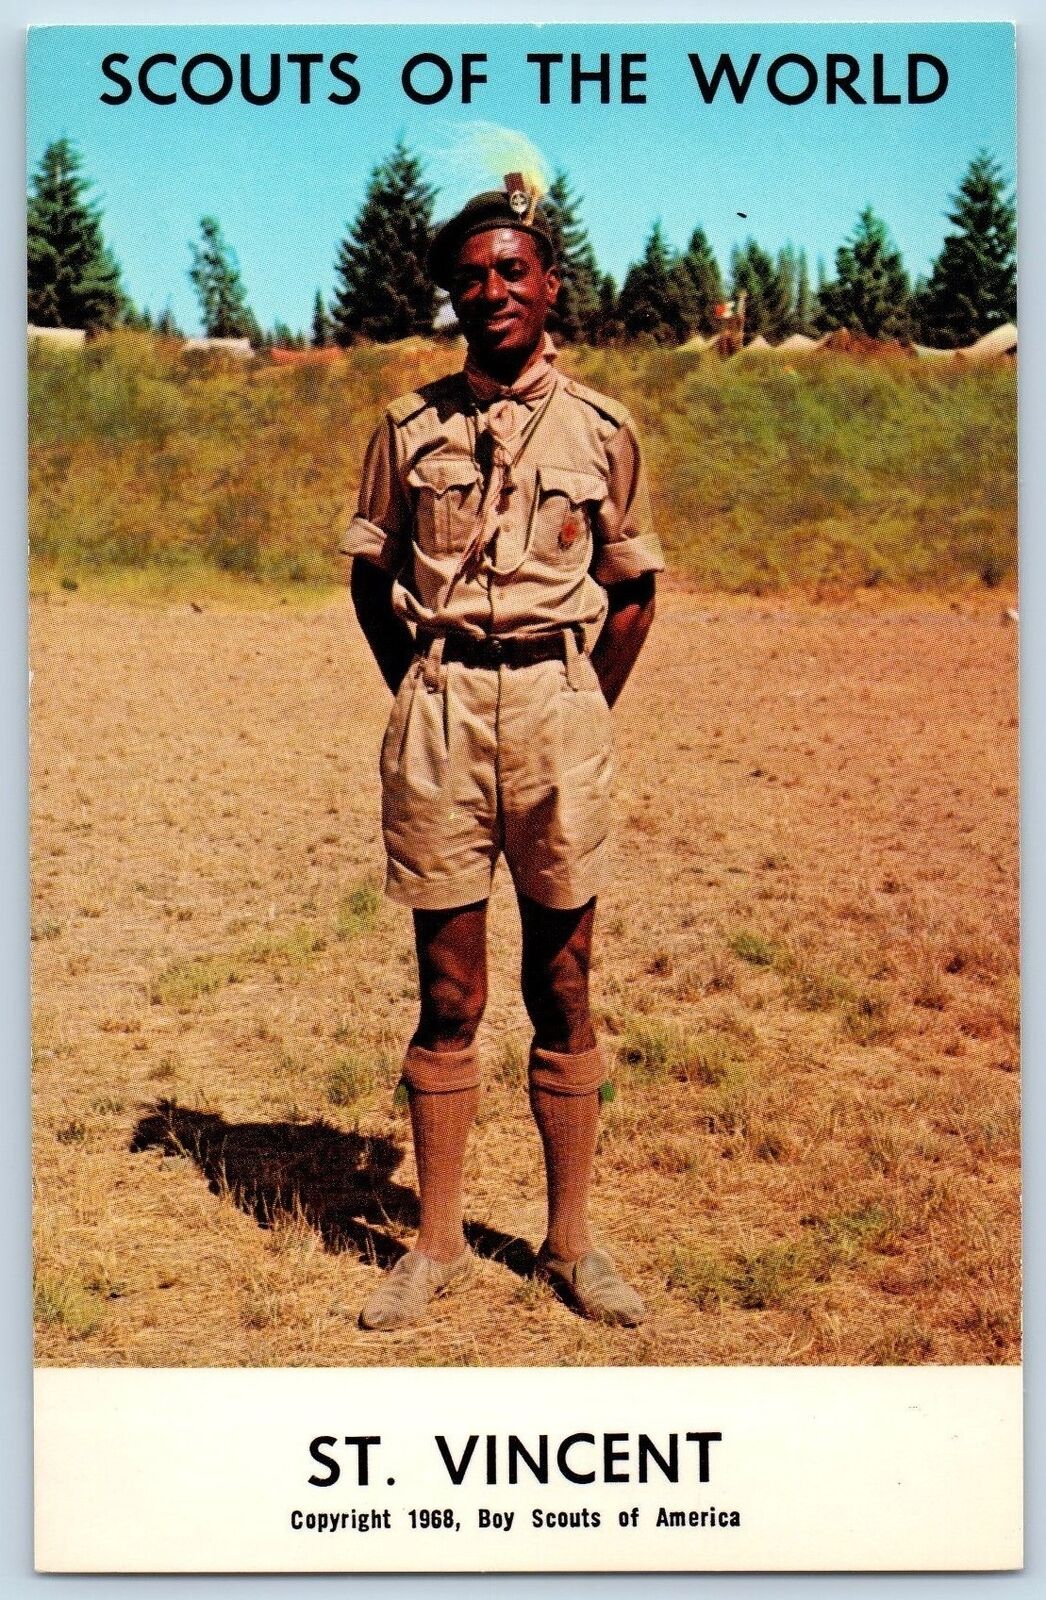 c1968 St. Vincent Scout Of The World Boy Scout Of America Youth Vintage Postcard